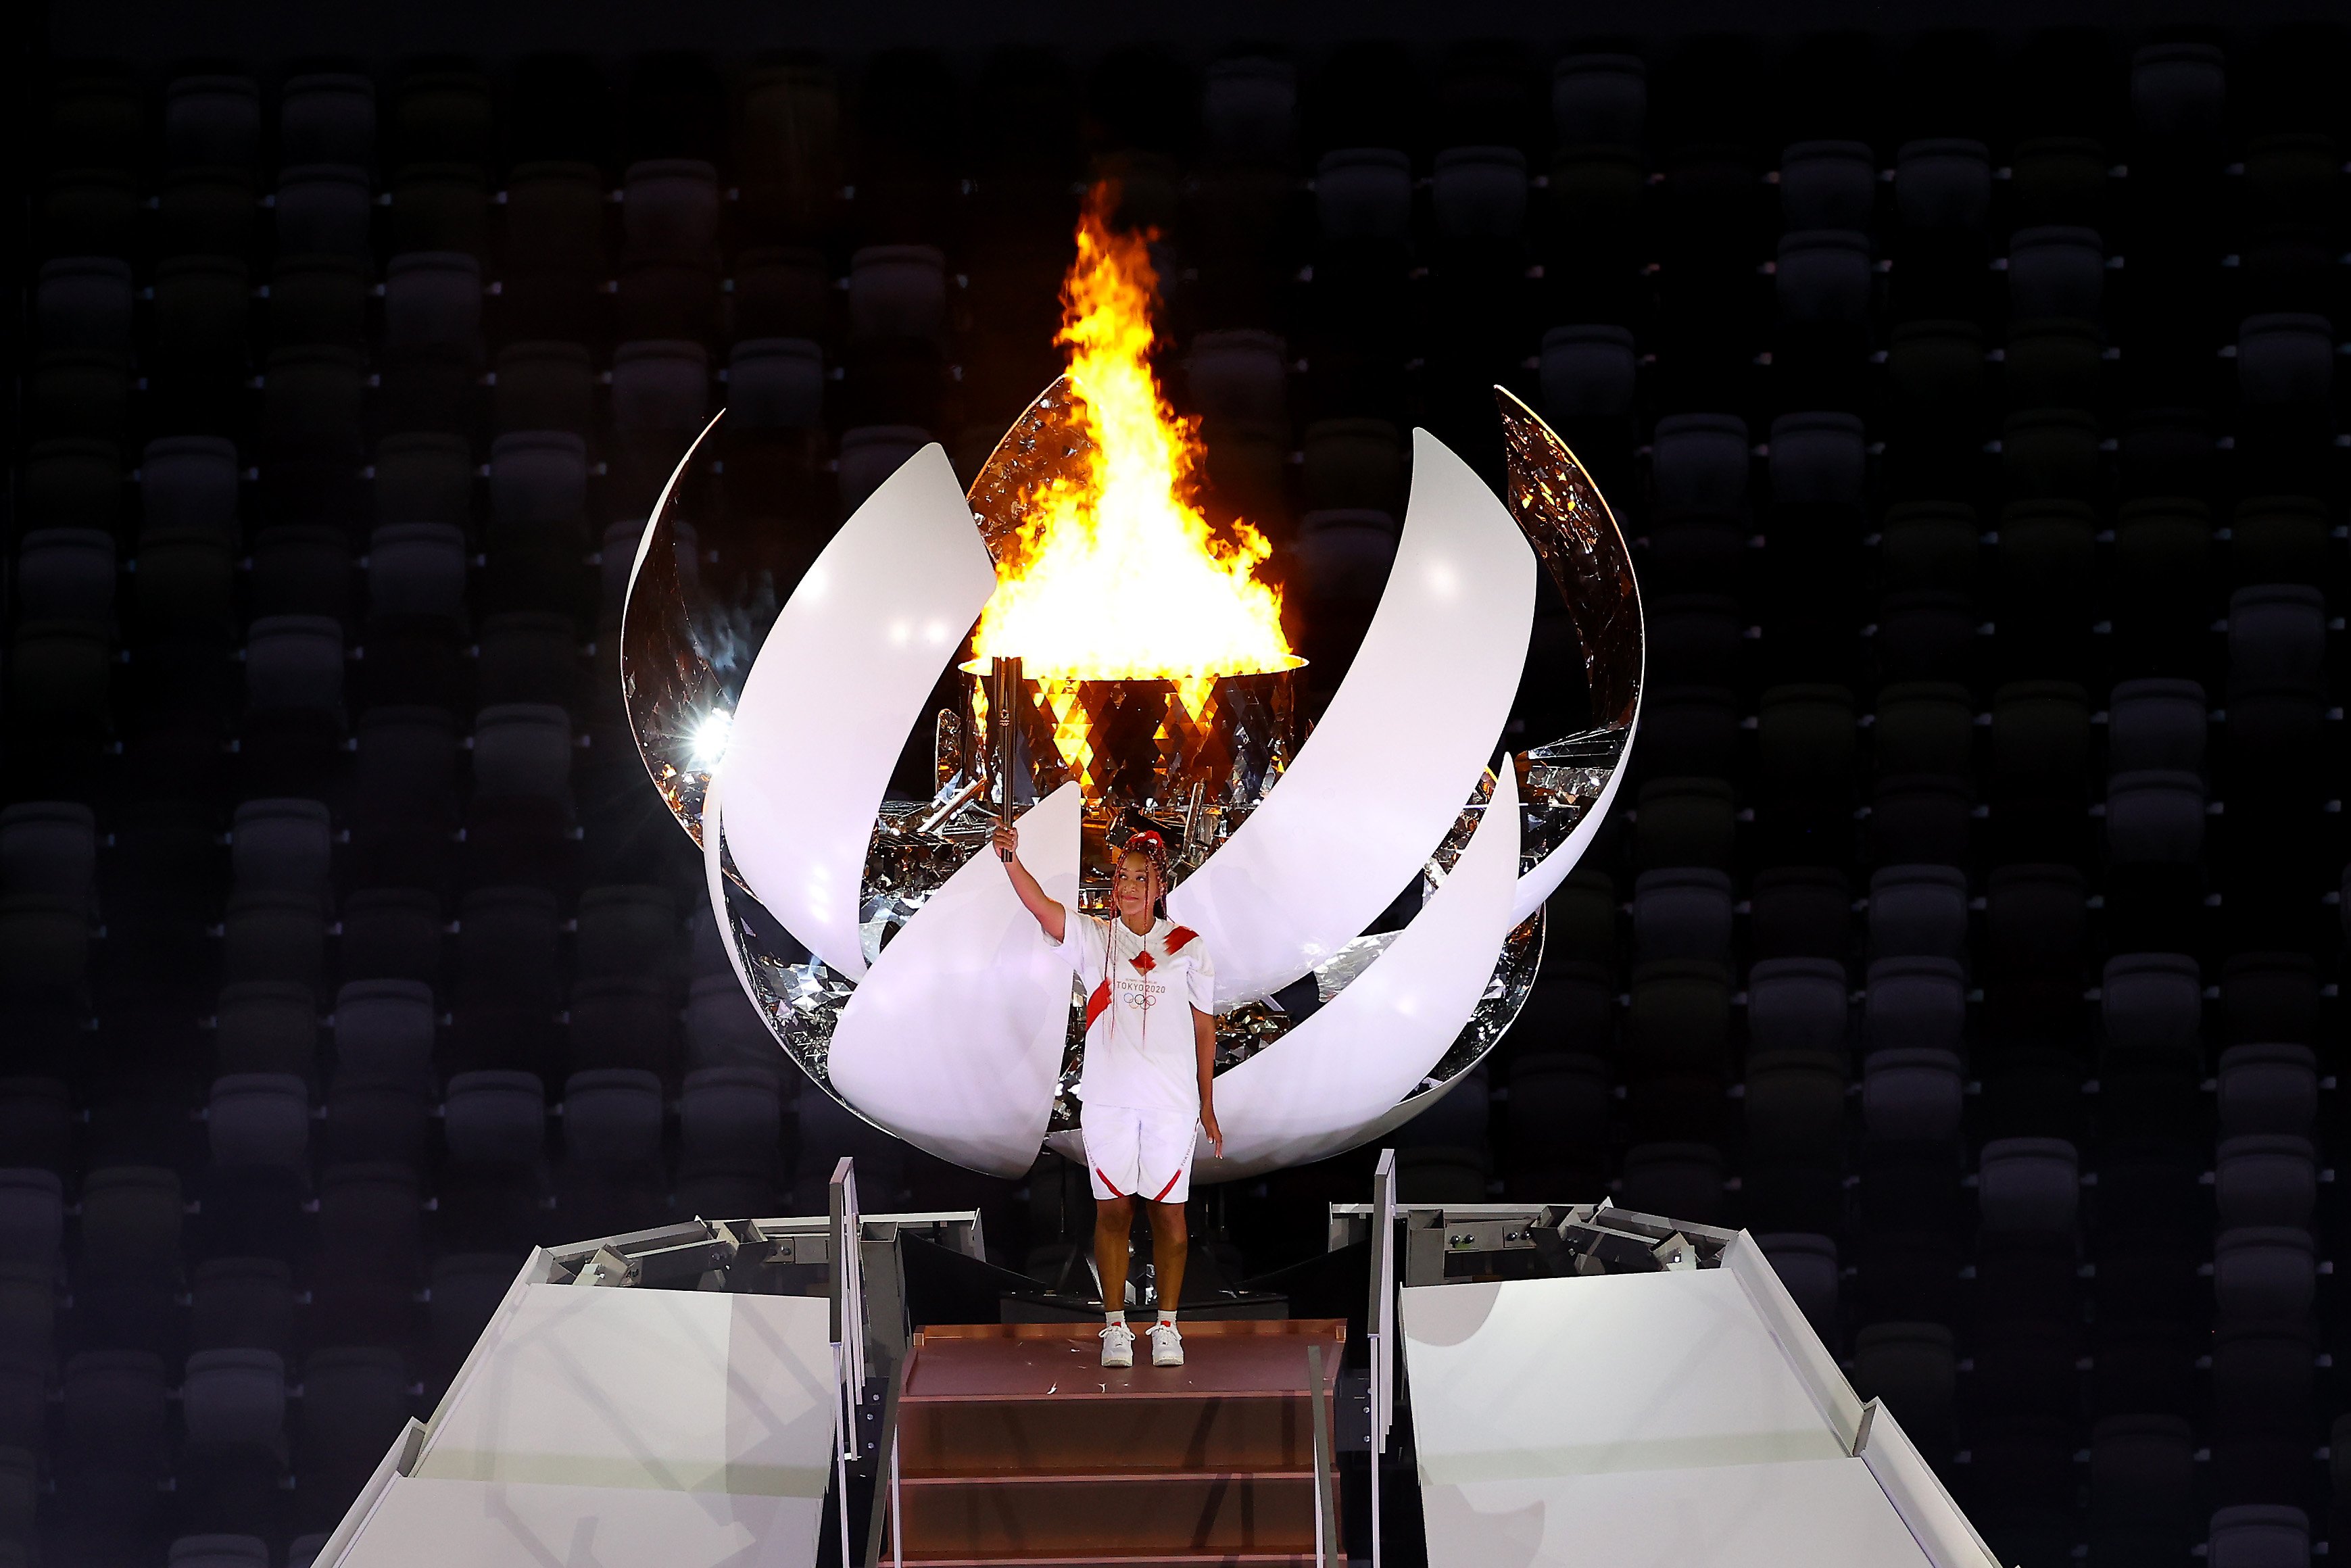 What Do the Olympic Rings and Flame Represent?